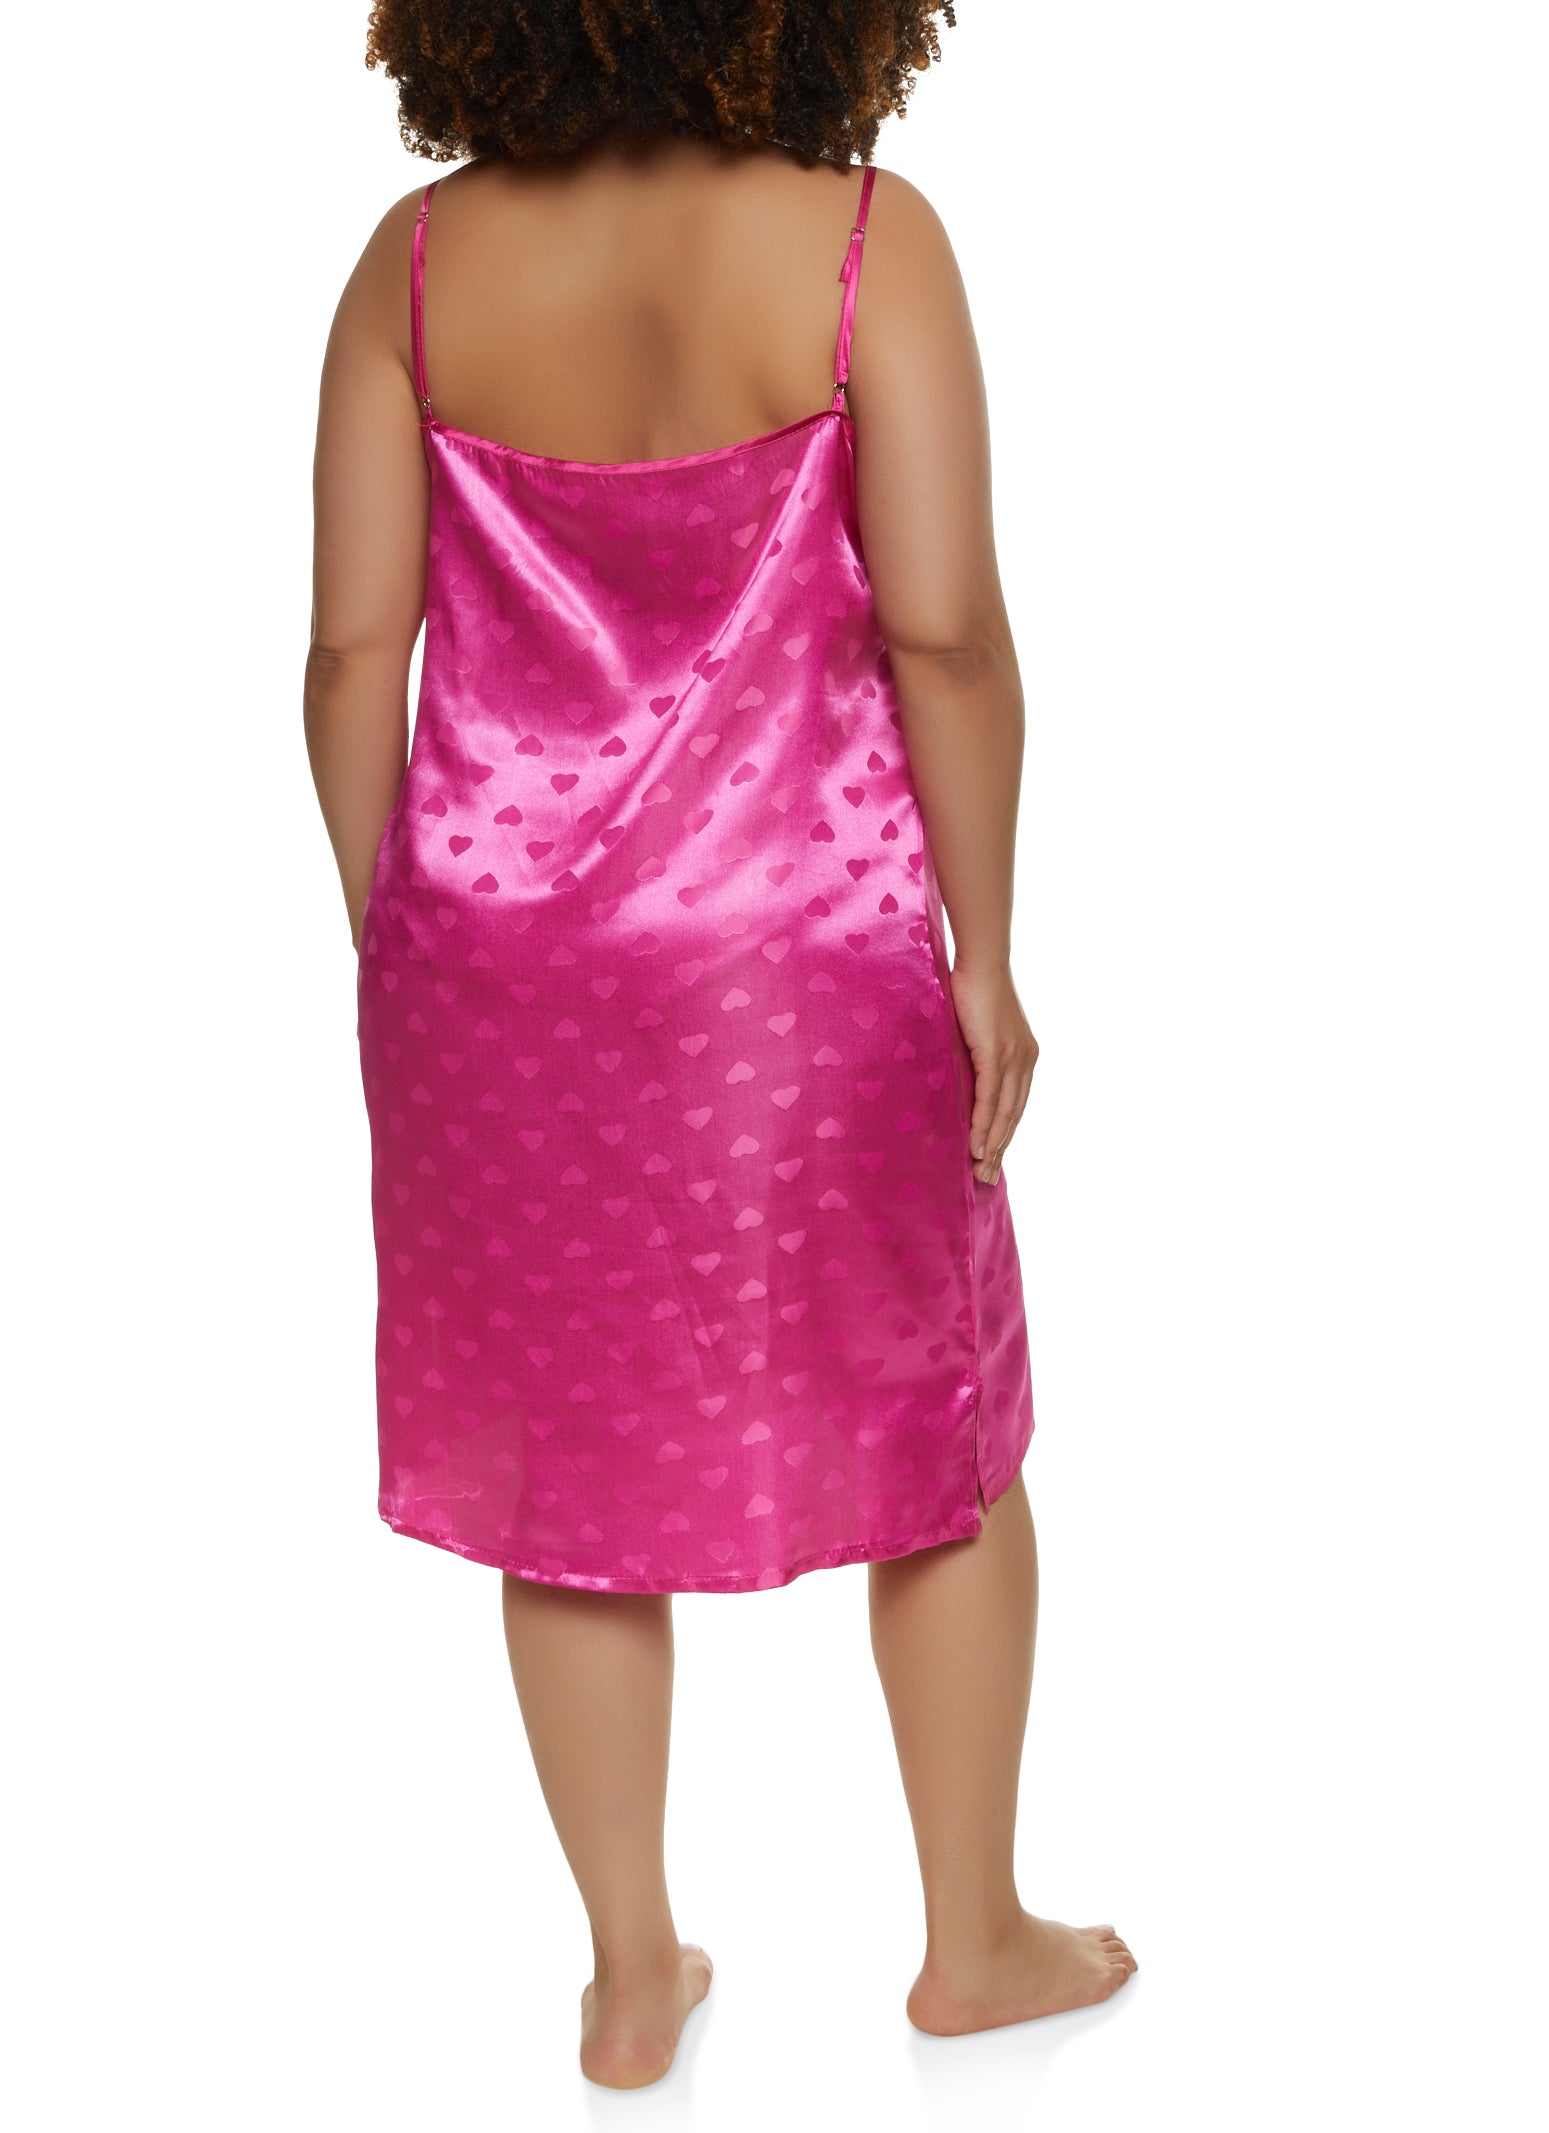 Plus Size Satin Heart Print Cami Nightgown and Robe